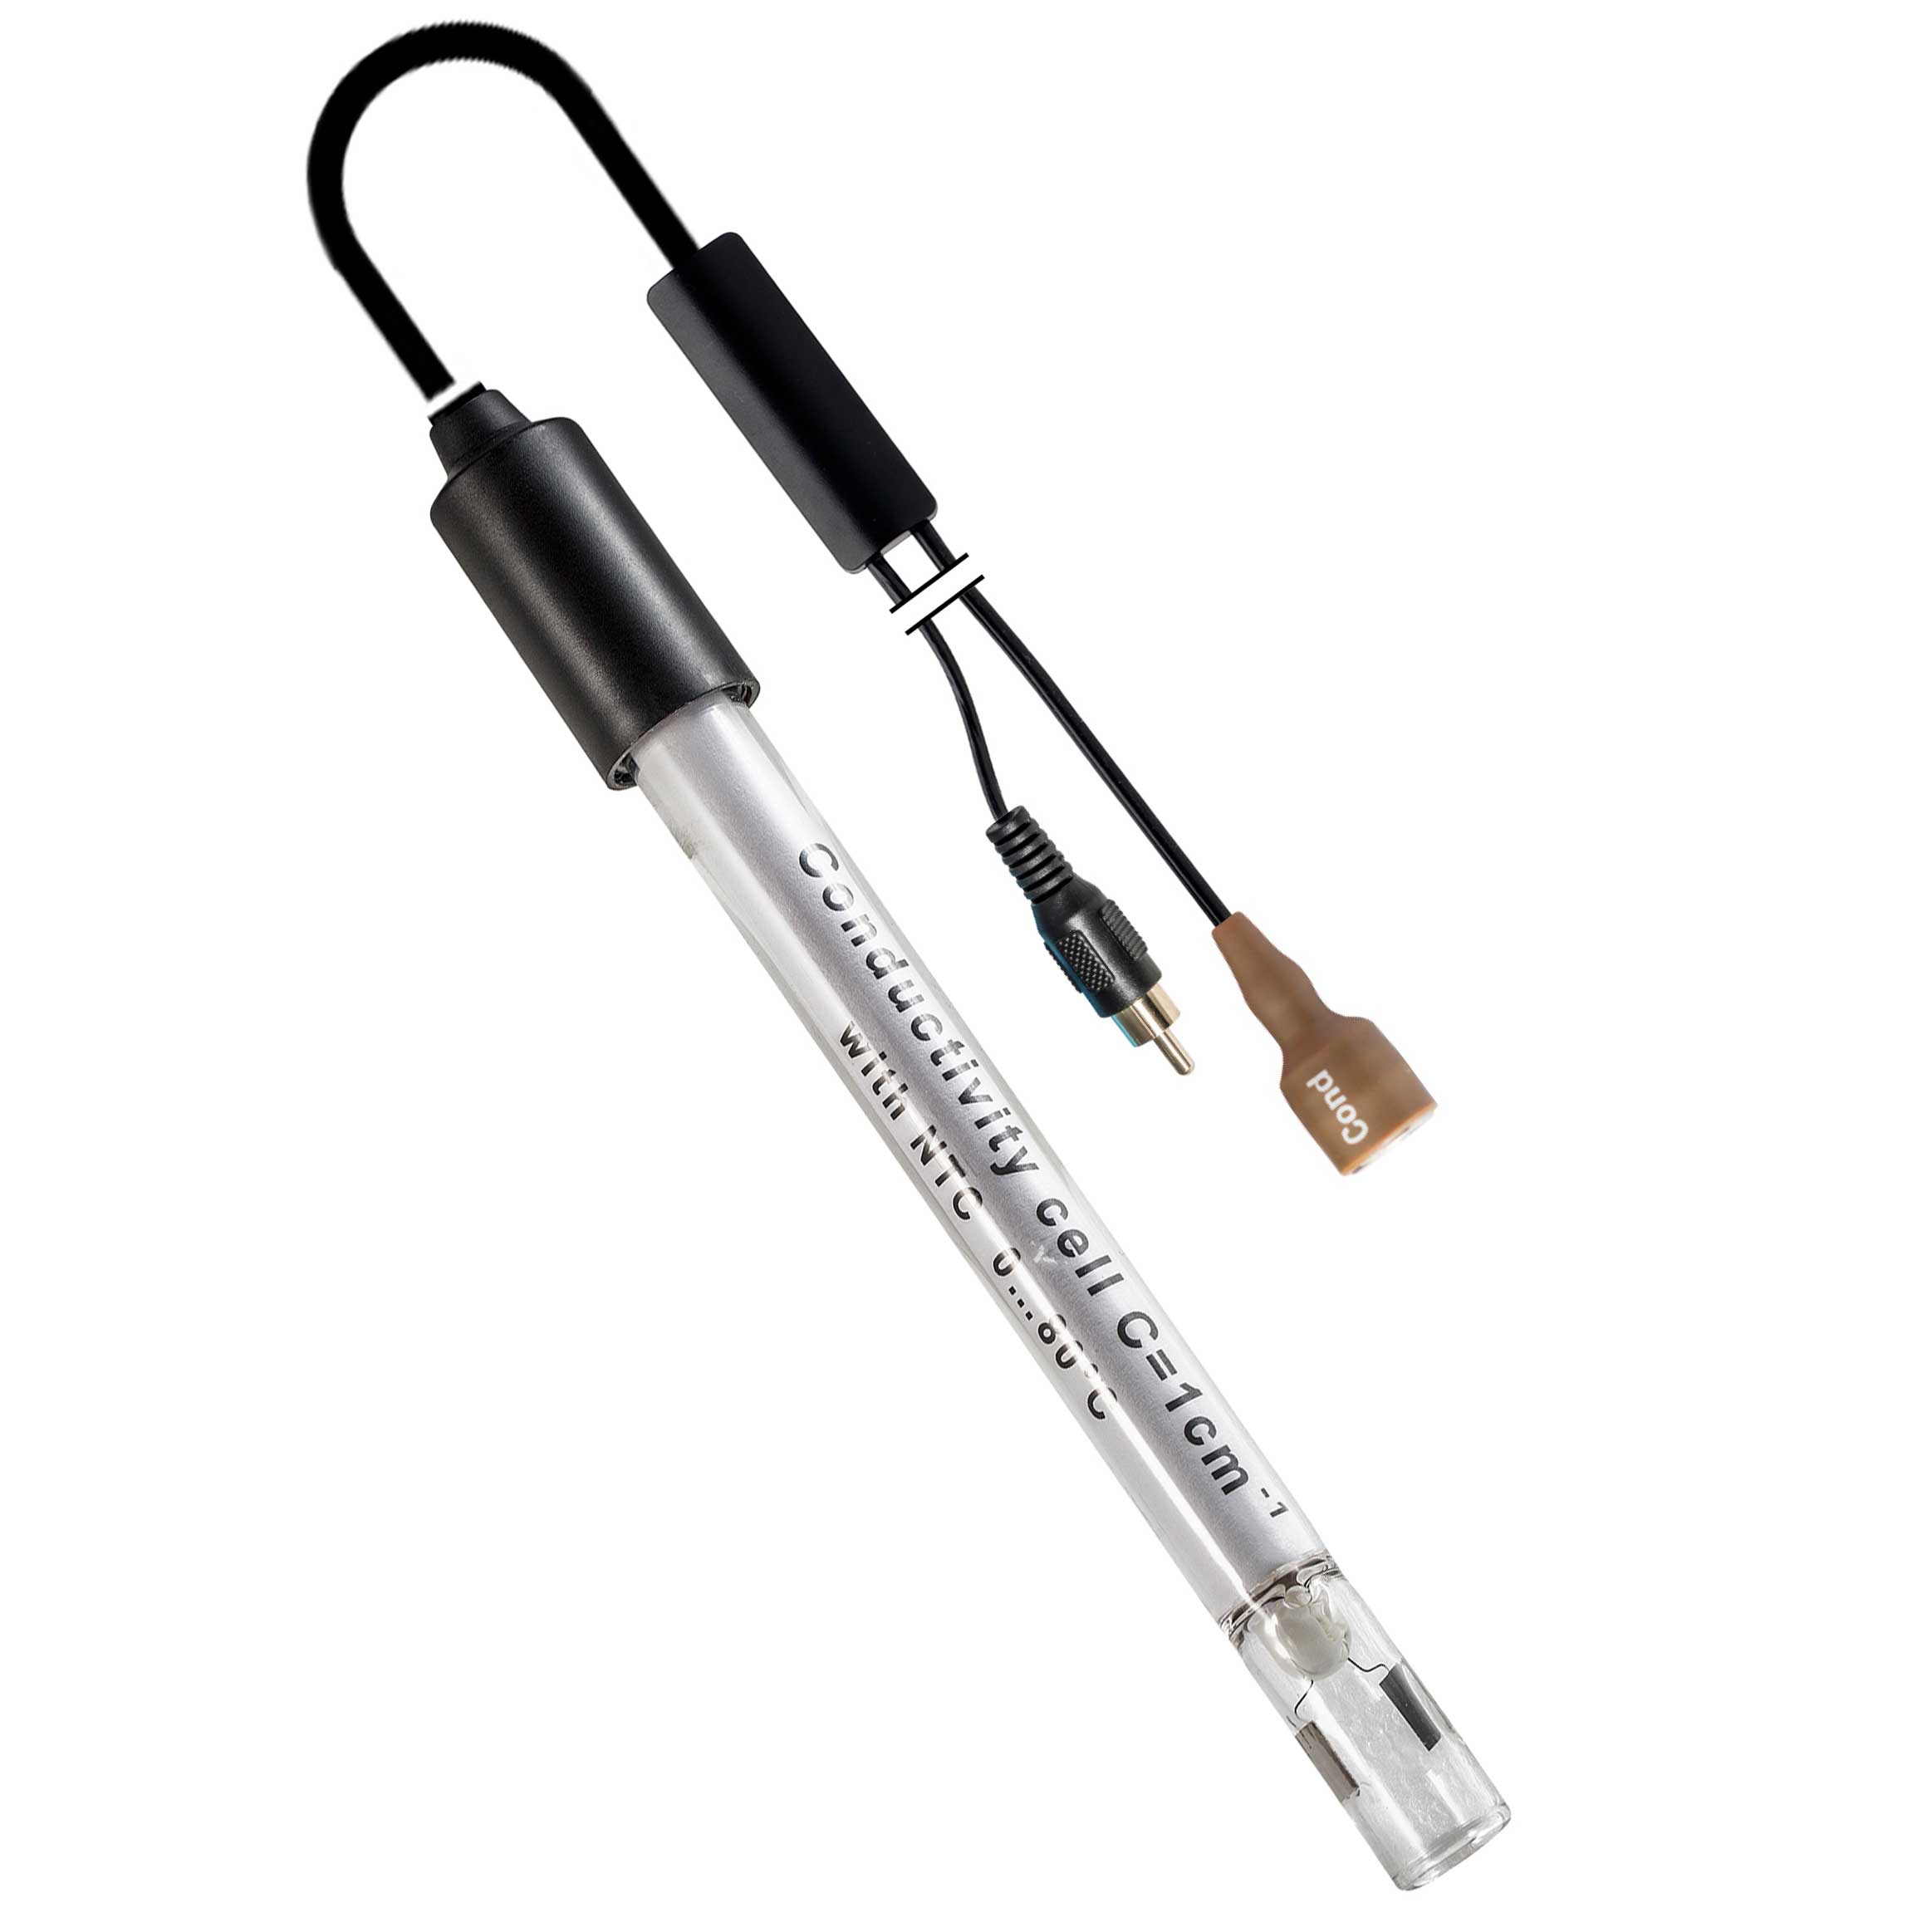 Conductivity cell VPT80 / 1 glass and platinum body with integrated temperature sensor NTC30K, 2-pole, K = 1 (10 µS to 150 mS), 0 to 80 ° C. BNC / Cinch connector, 1 m cable. For general use